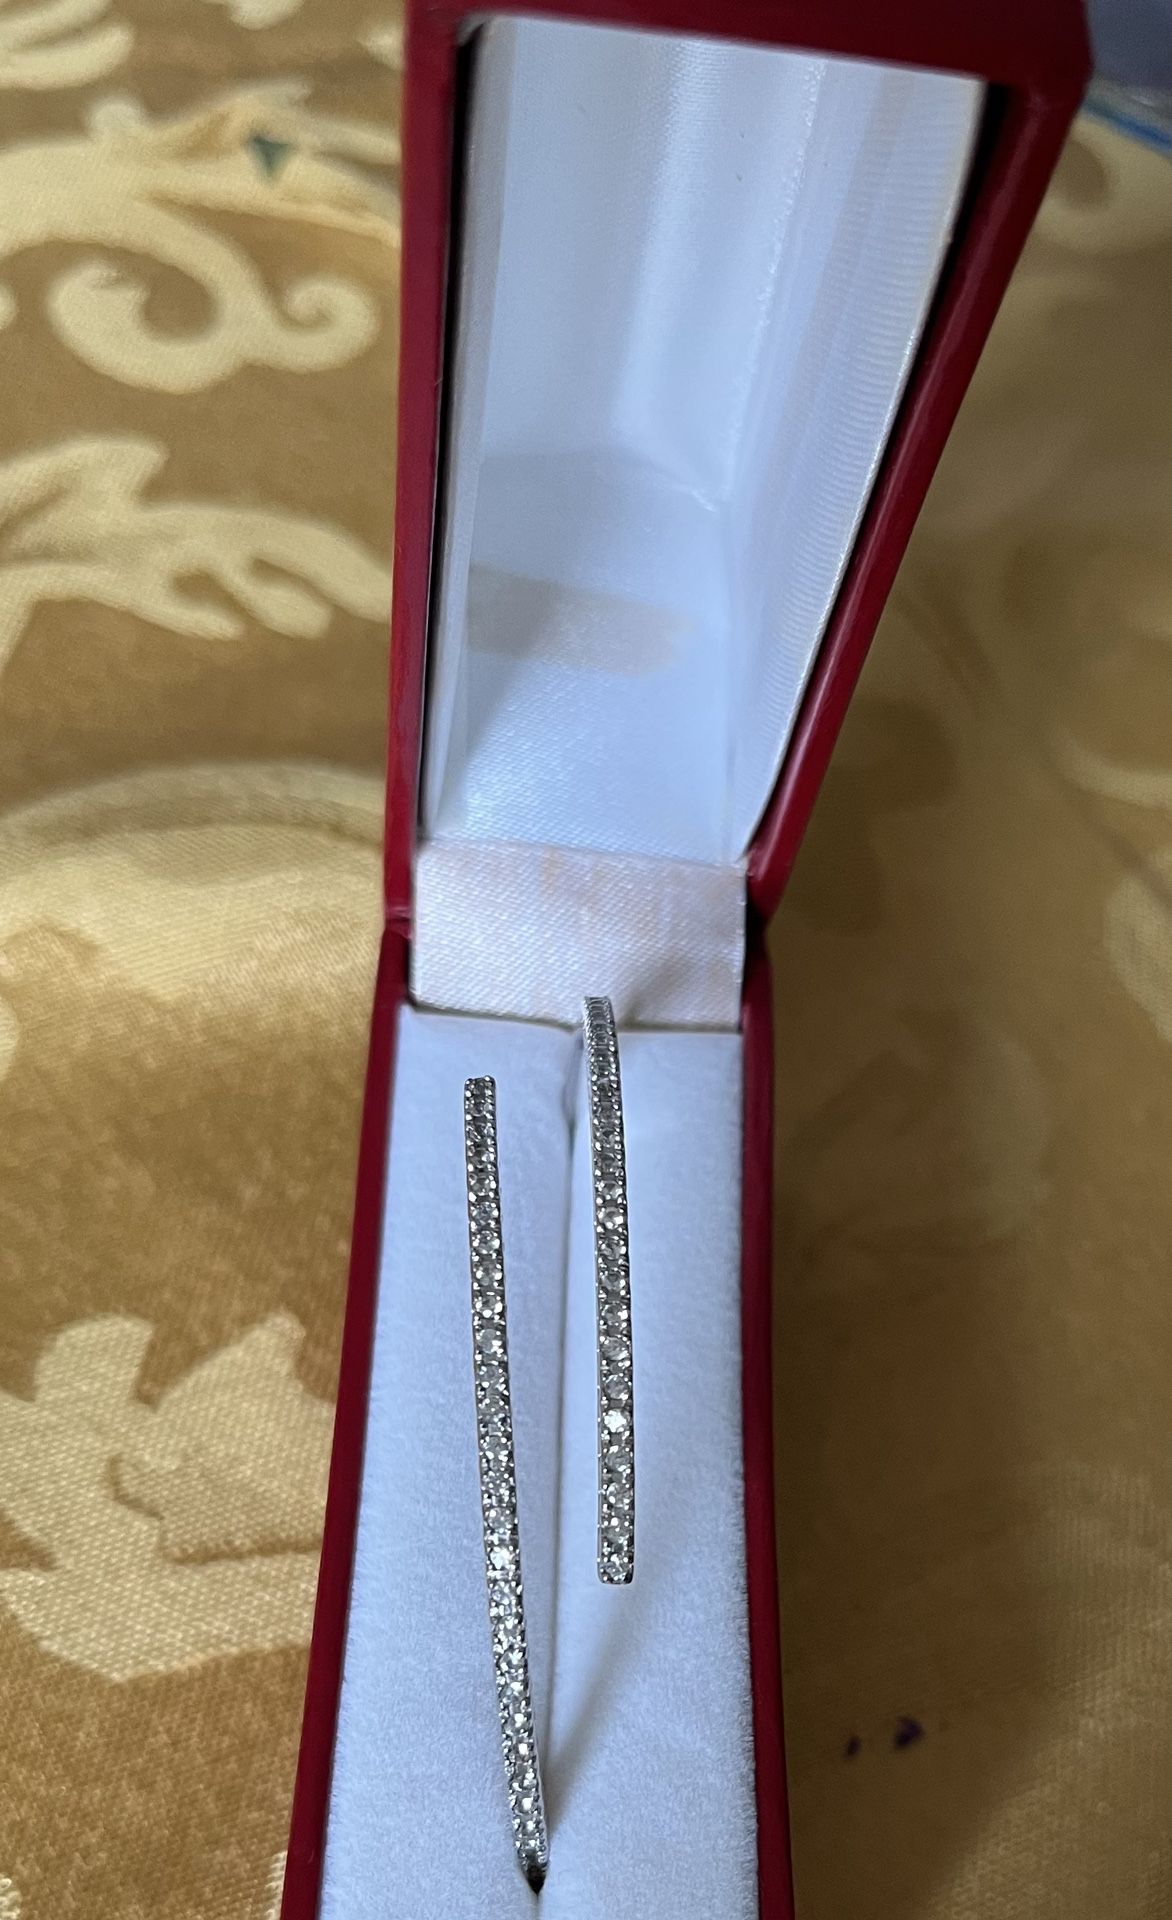 MOTHER’S GIFTS 🎁Like New 925 Sterling Silver Genuino Diamonds Bangle 